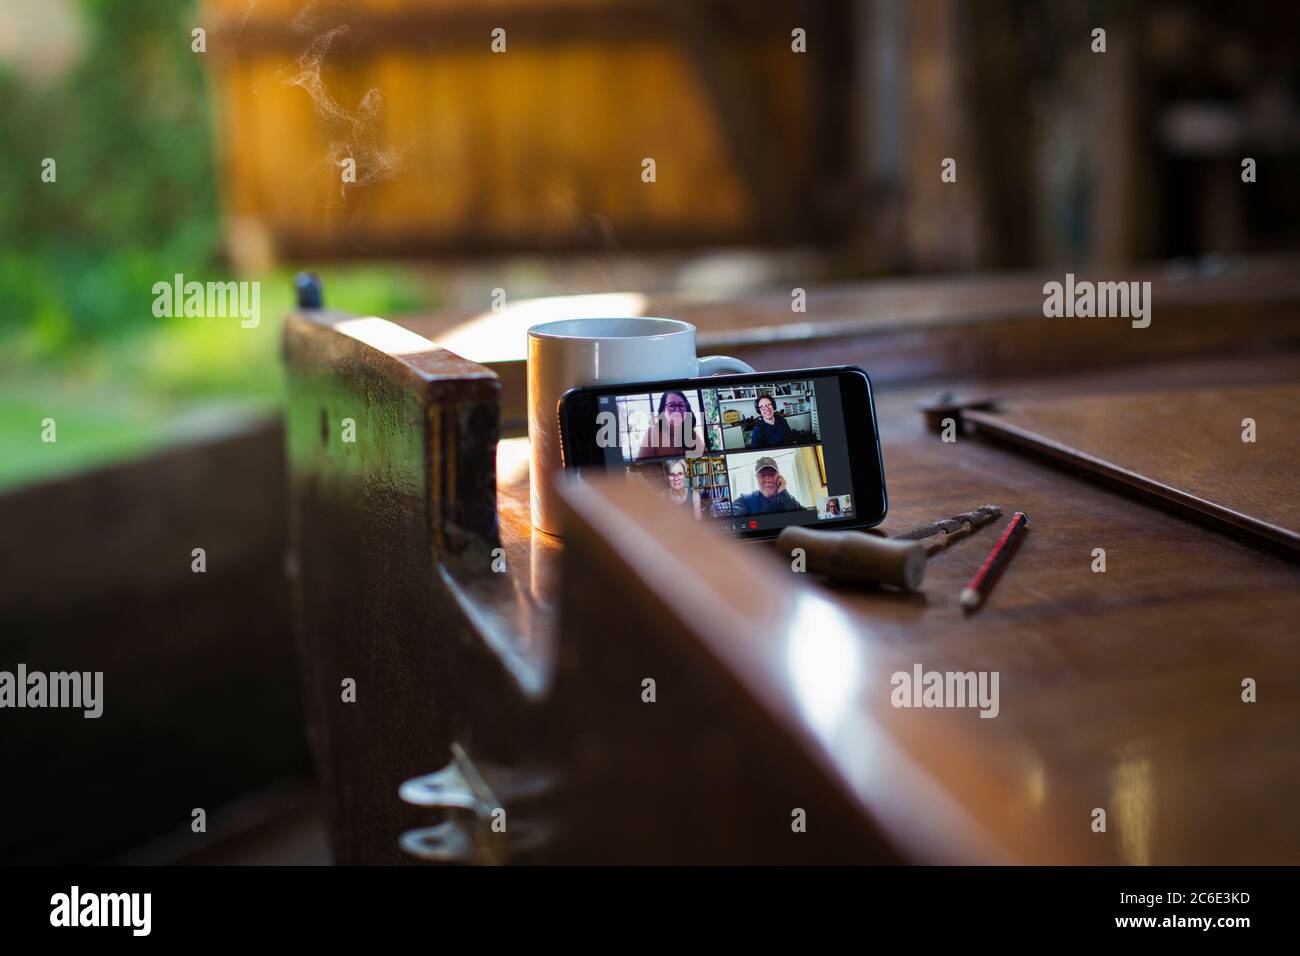 Colleagues video chatting on smart phone screen on wooden boat Stock Photo